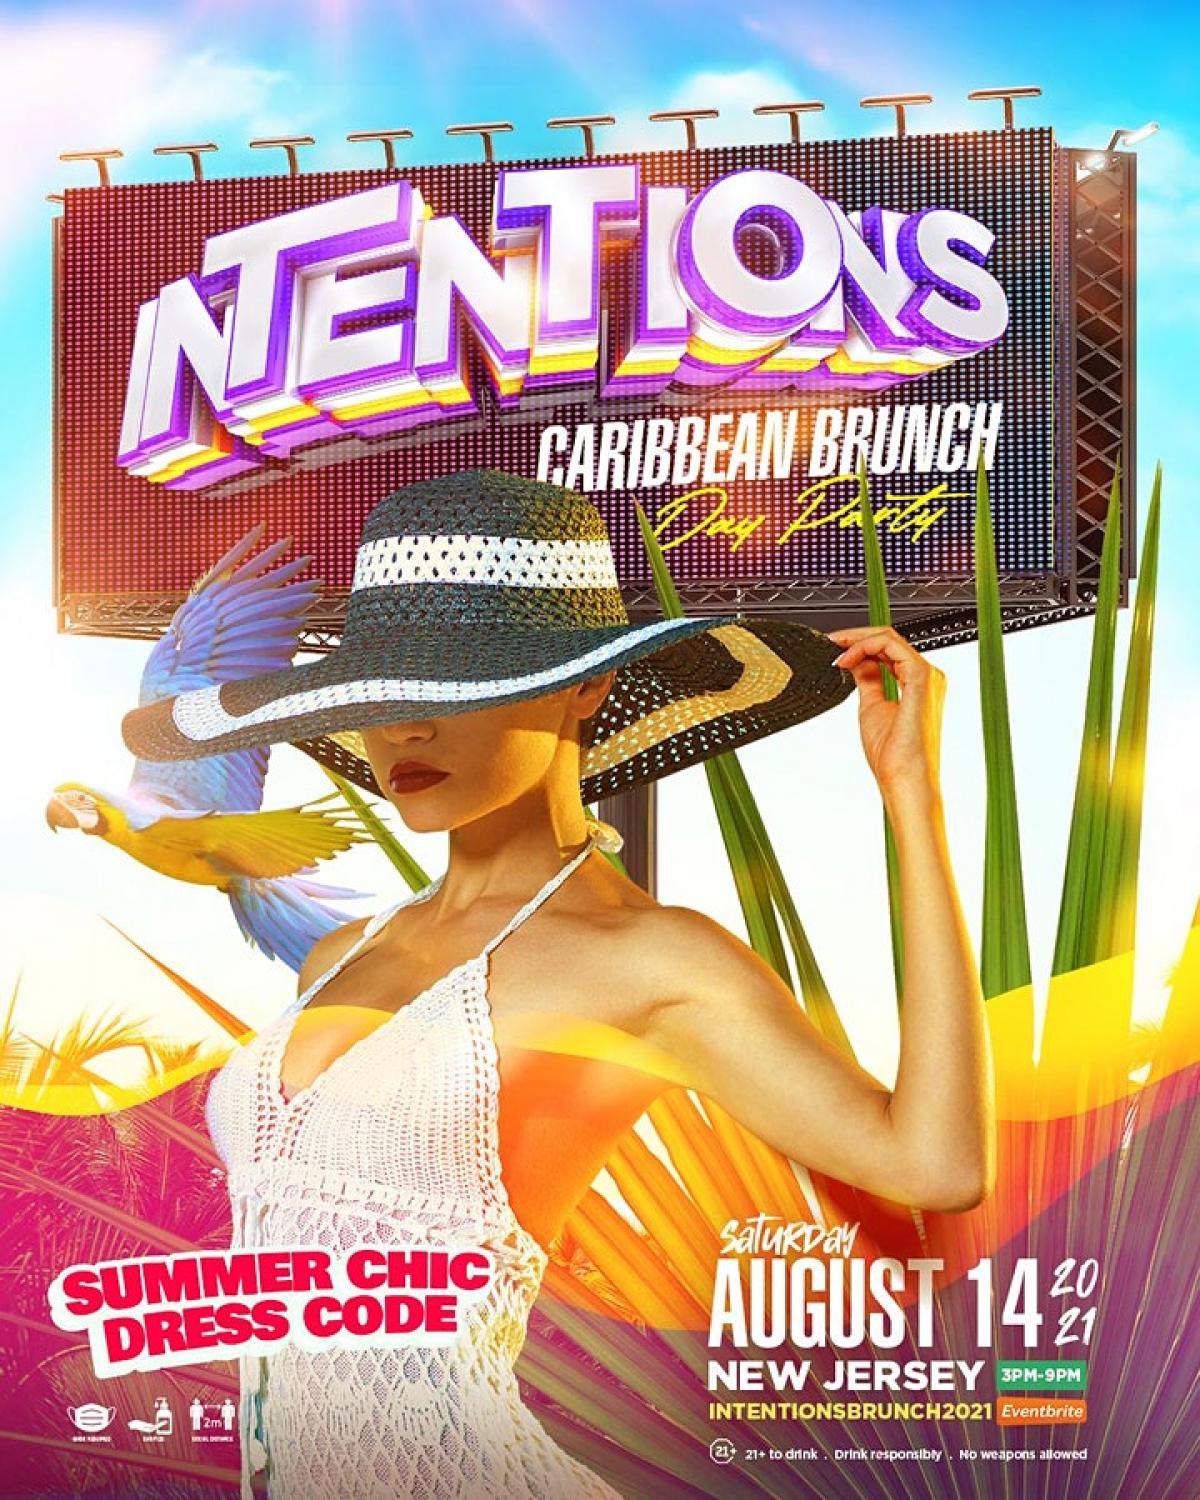 Intentions 2021 - Caribbean Brunch & Day Party flyer or graphic.